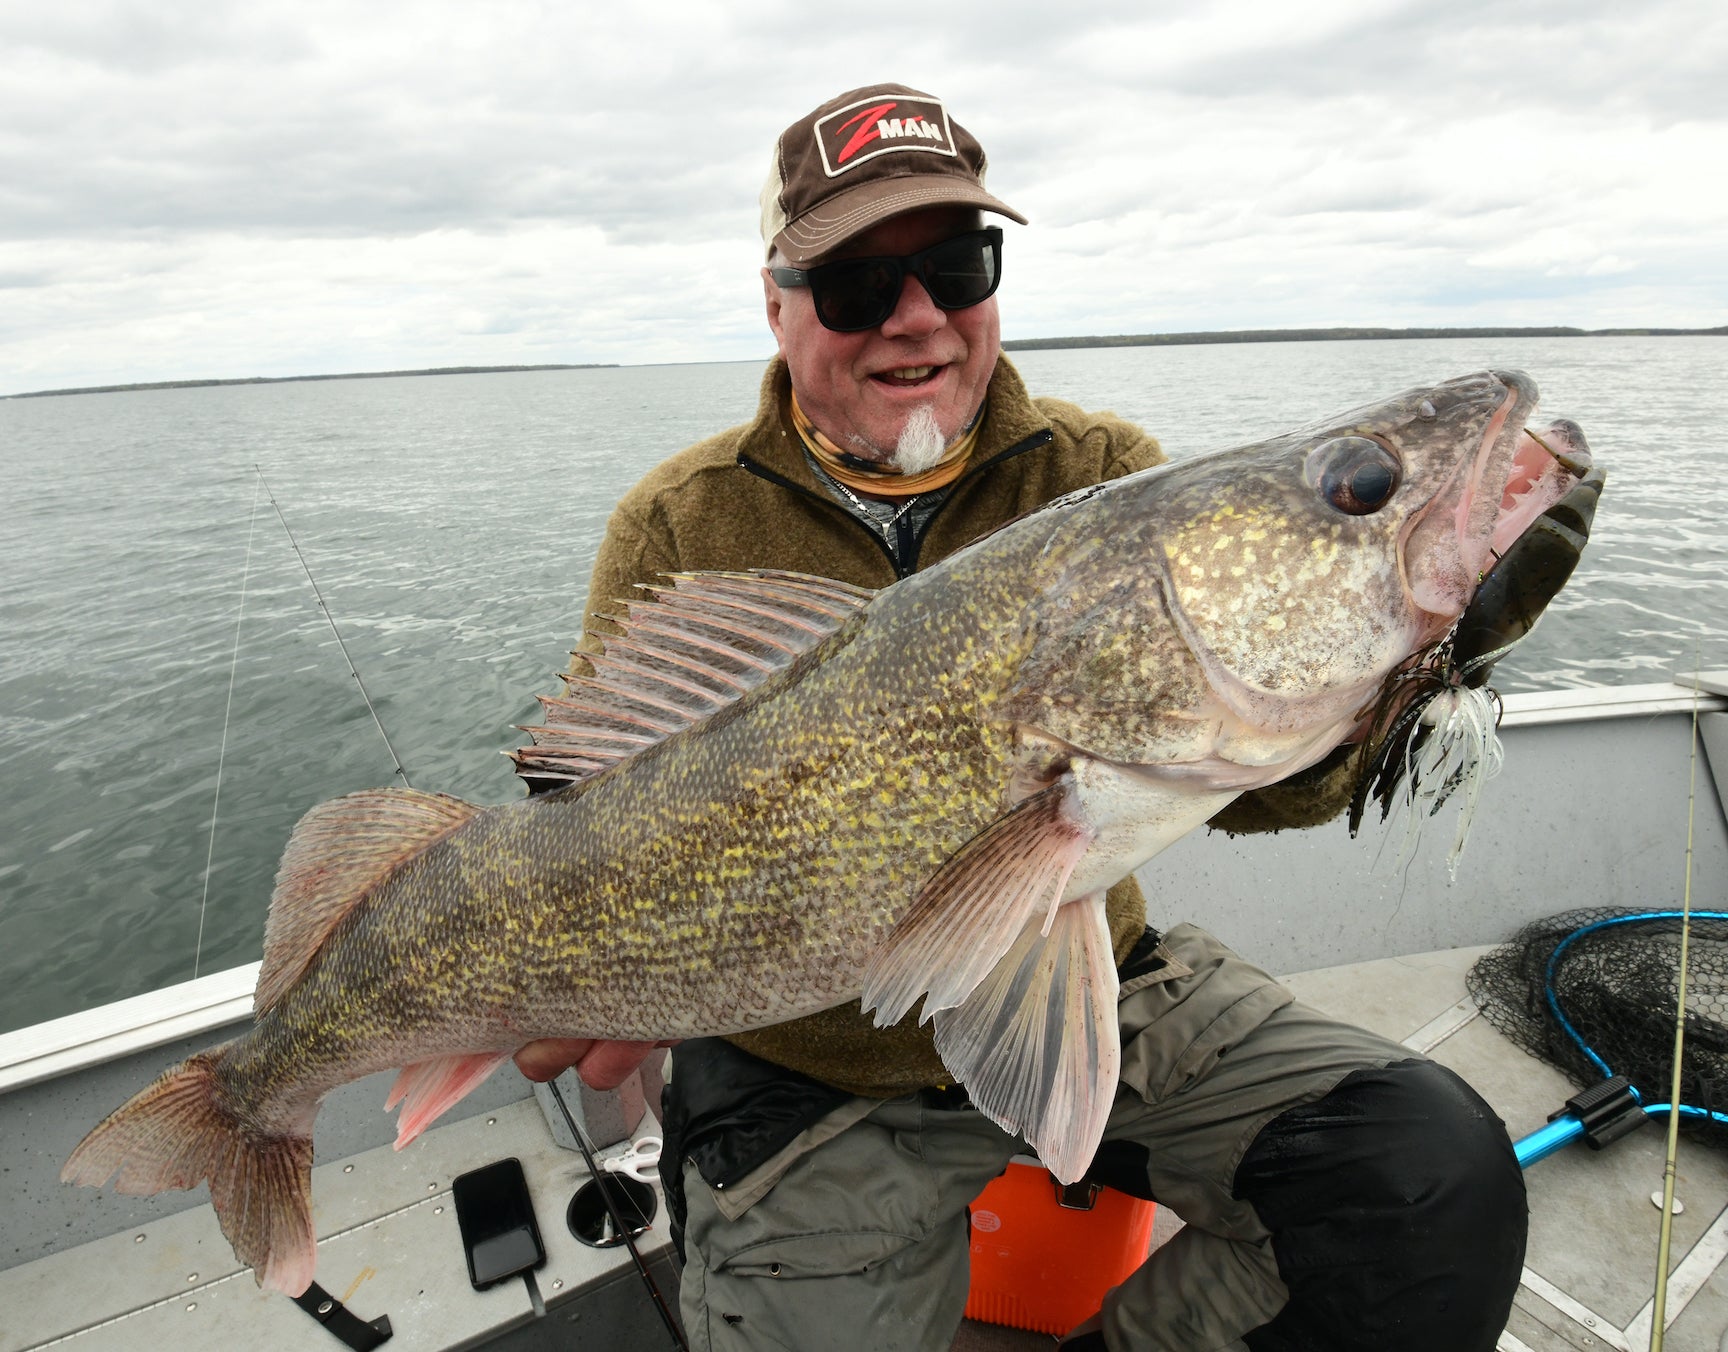 Gentleman with Walleye caught on ChatterBait